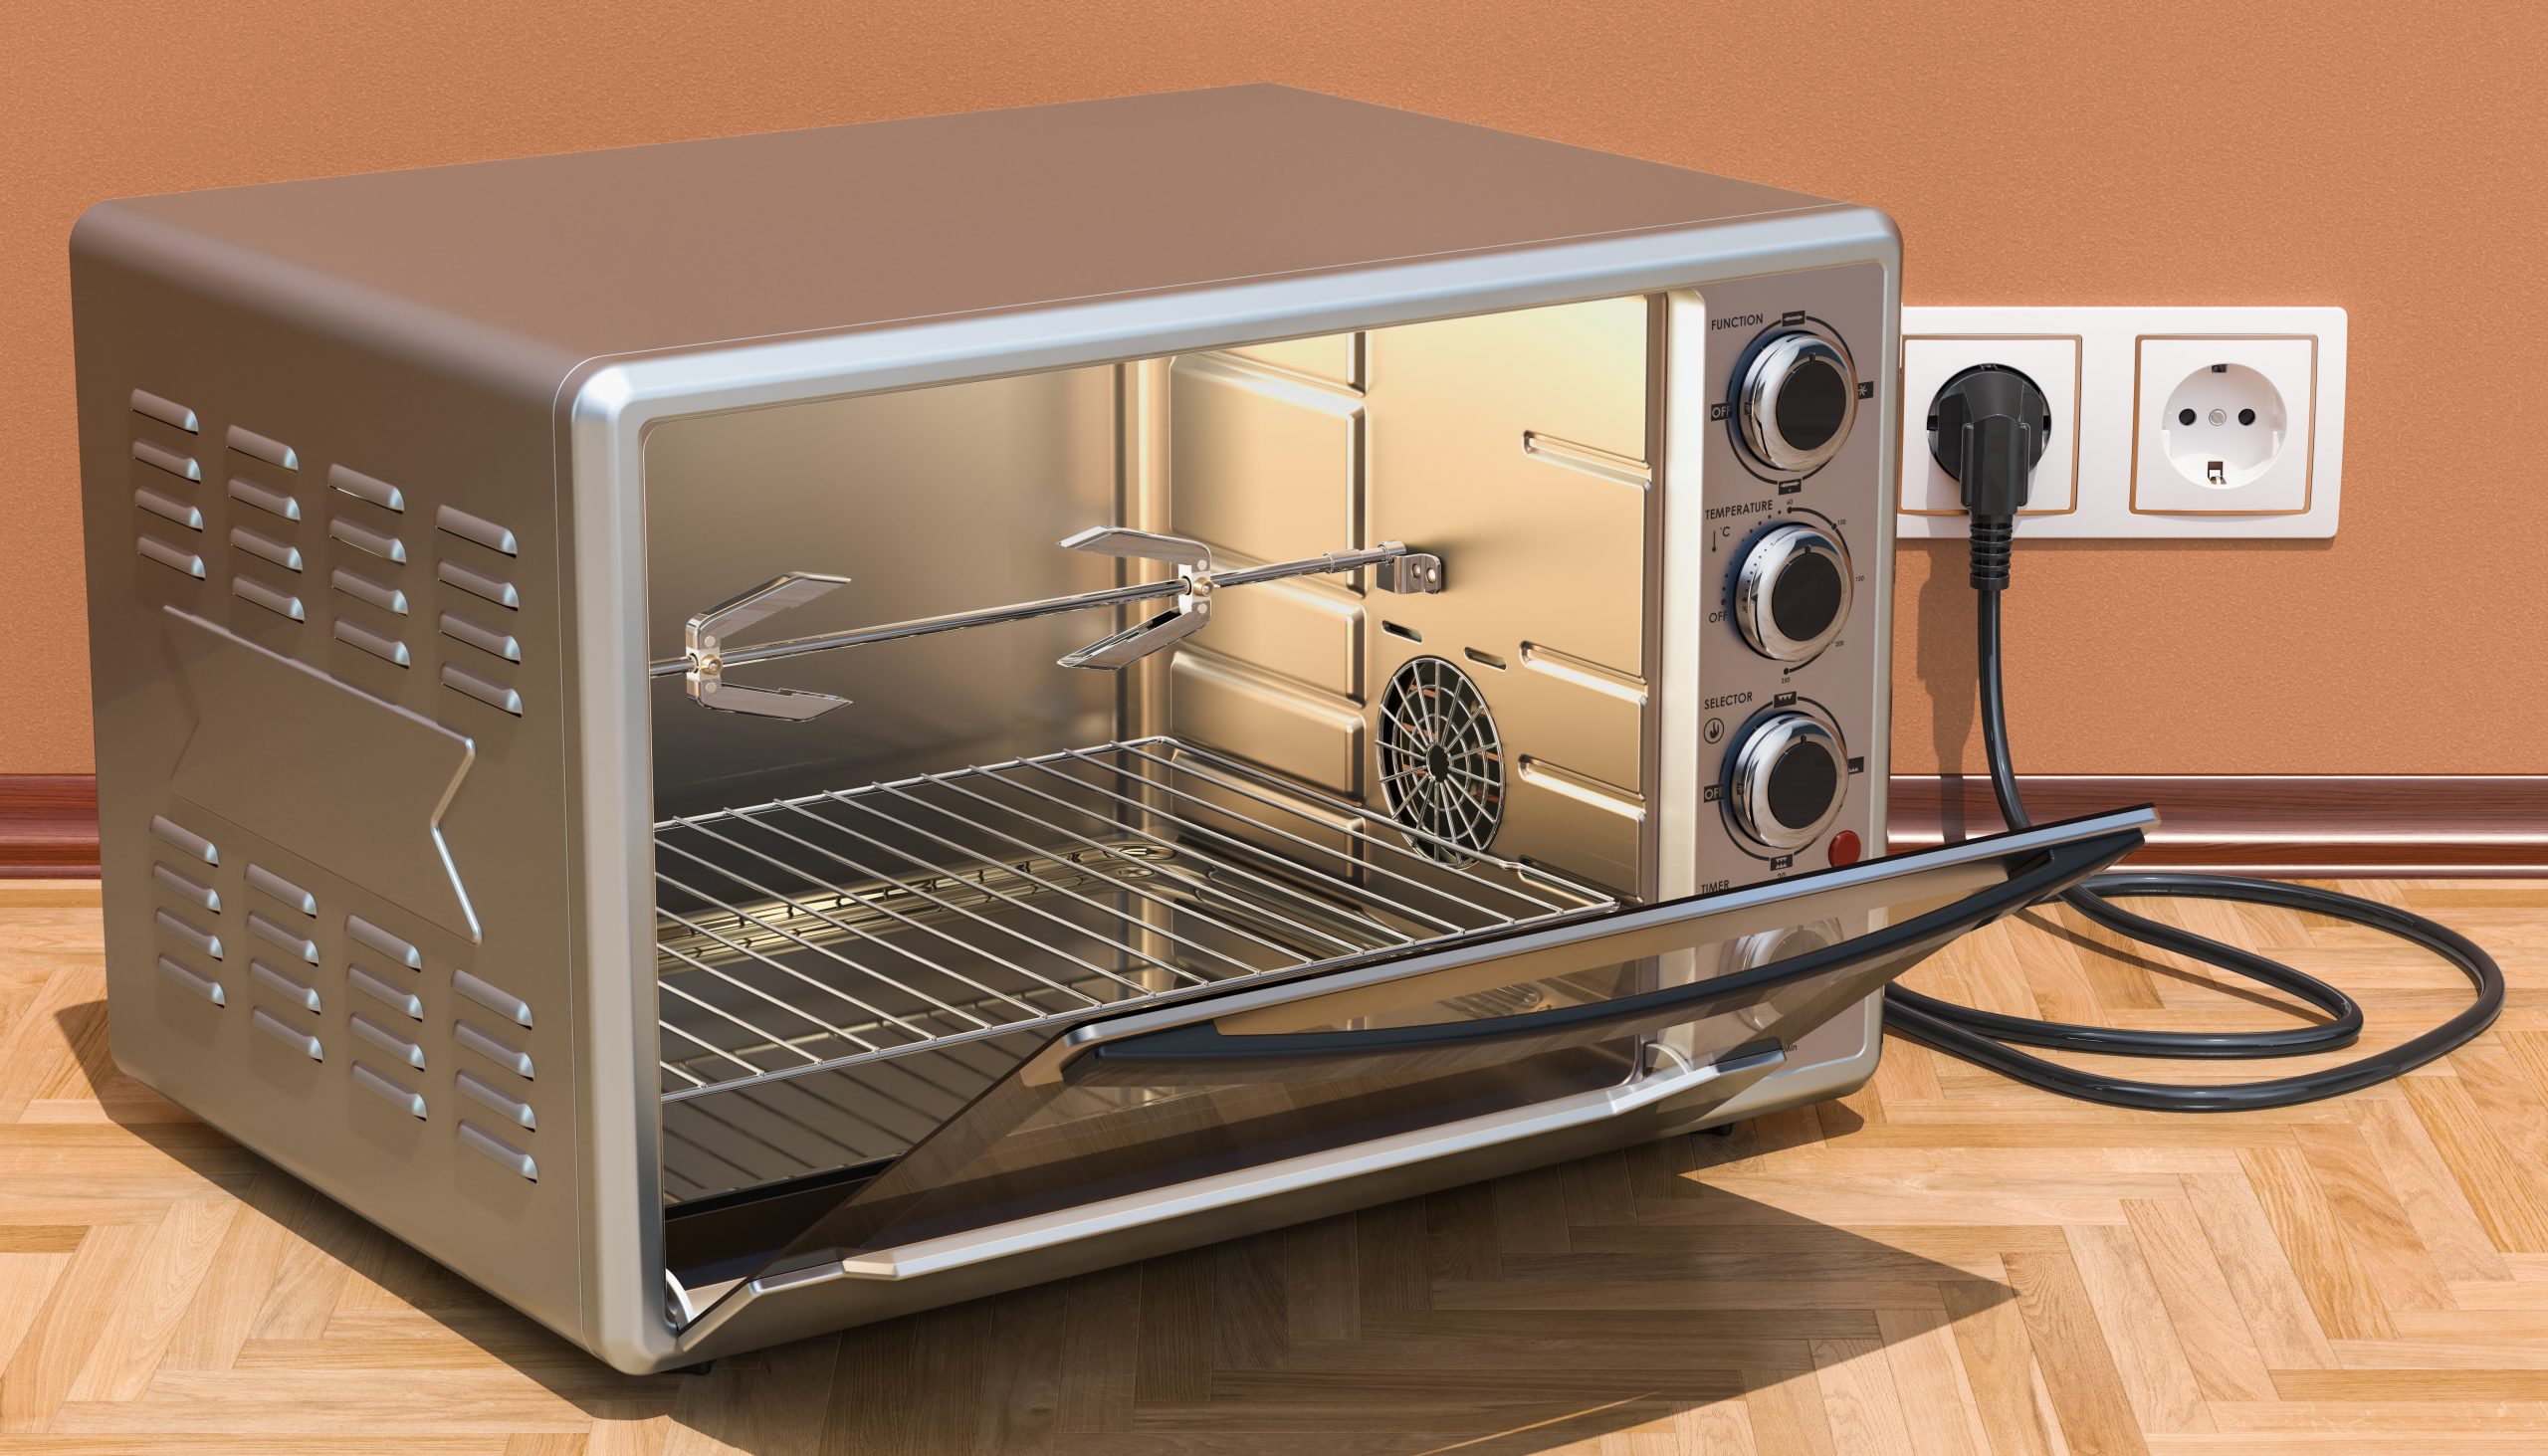 https://www.dontwasteyourmoney.com/wp-content/uploads/2020/07/best-stainless-steel-countertop-oven-scaled.jpeg